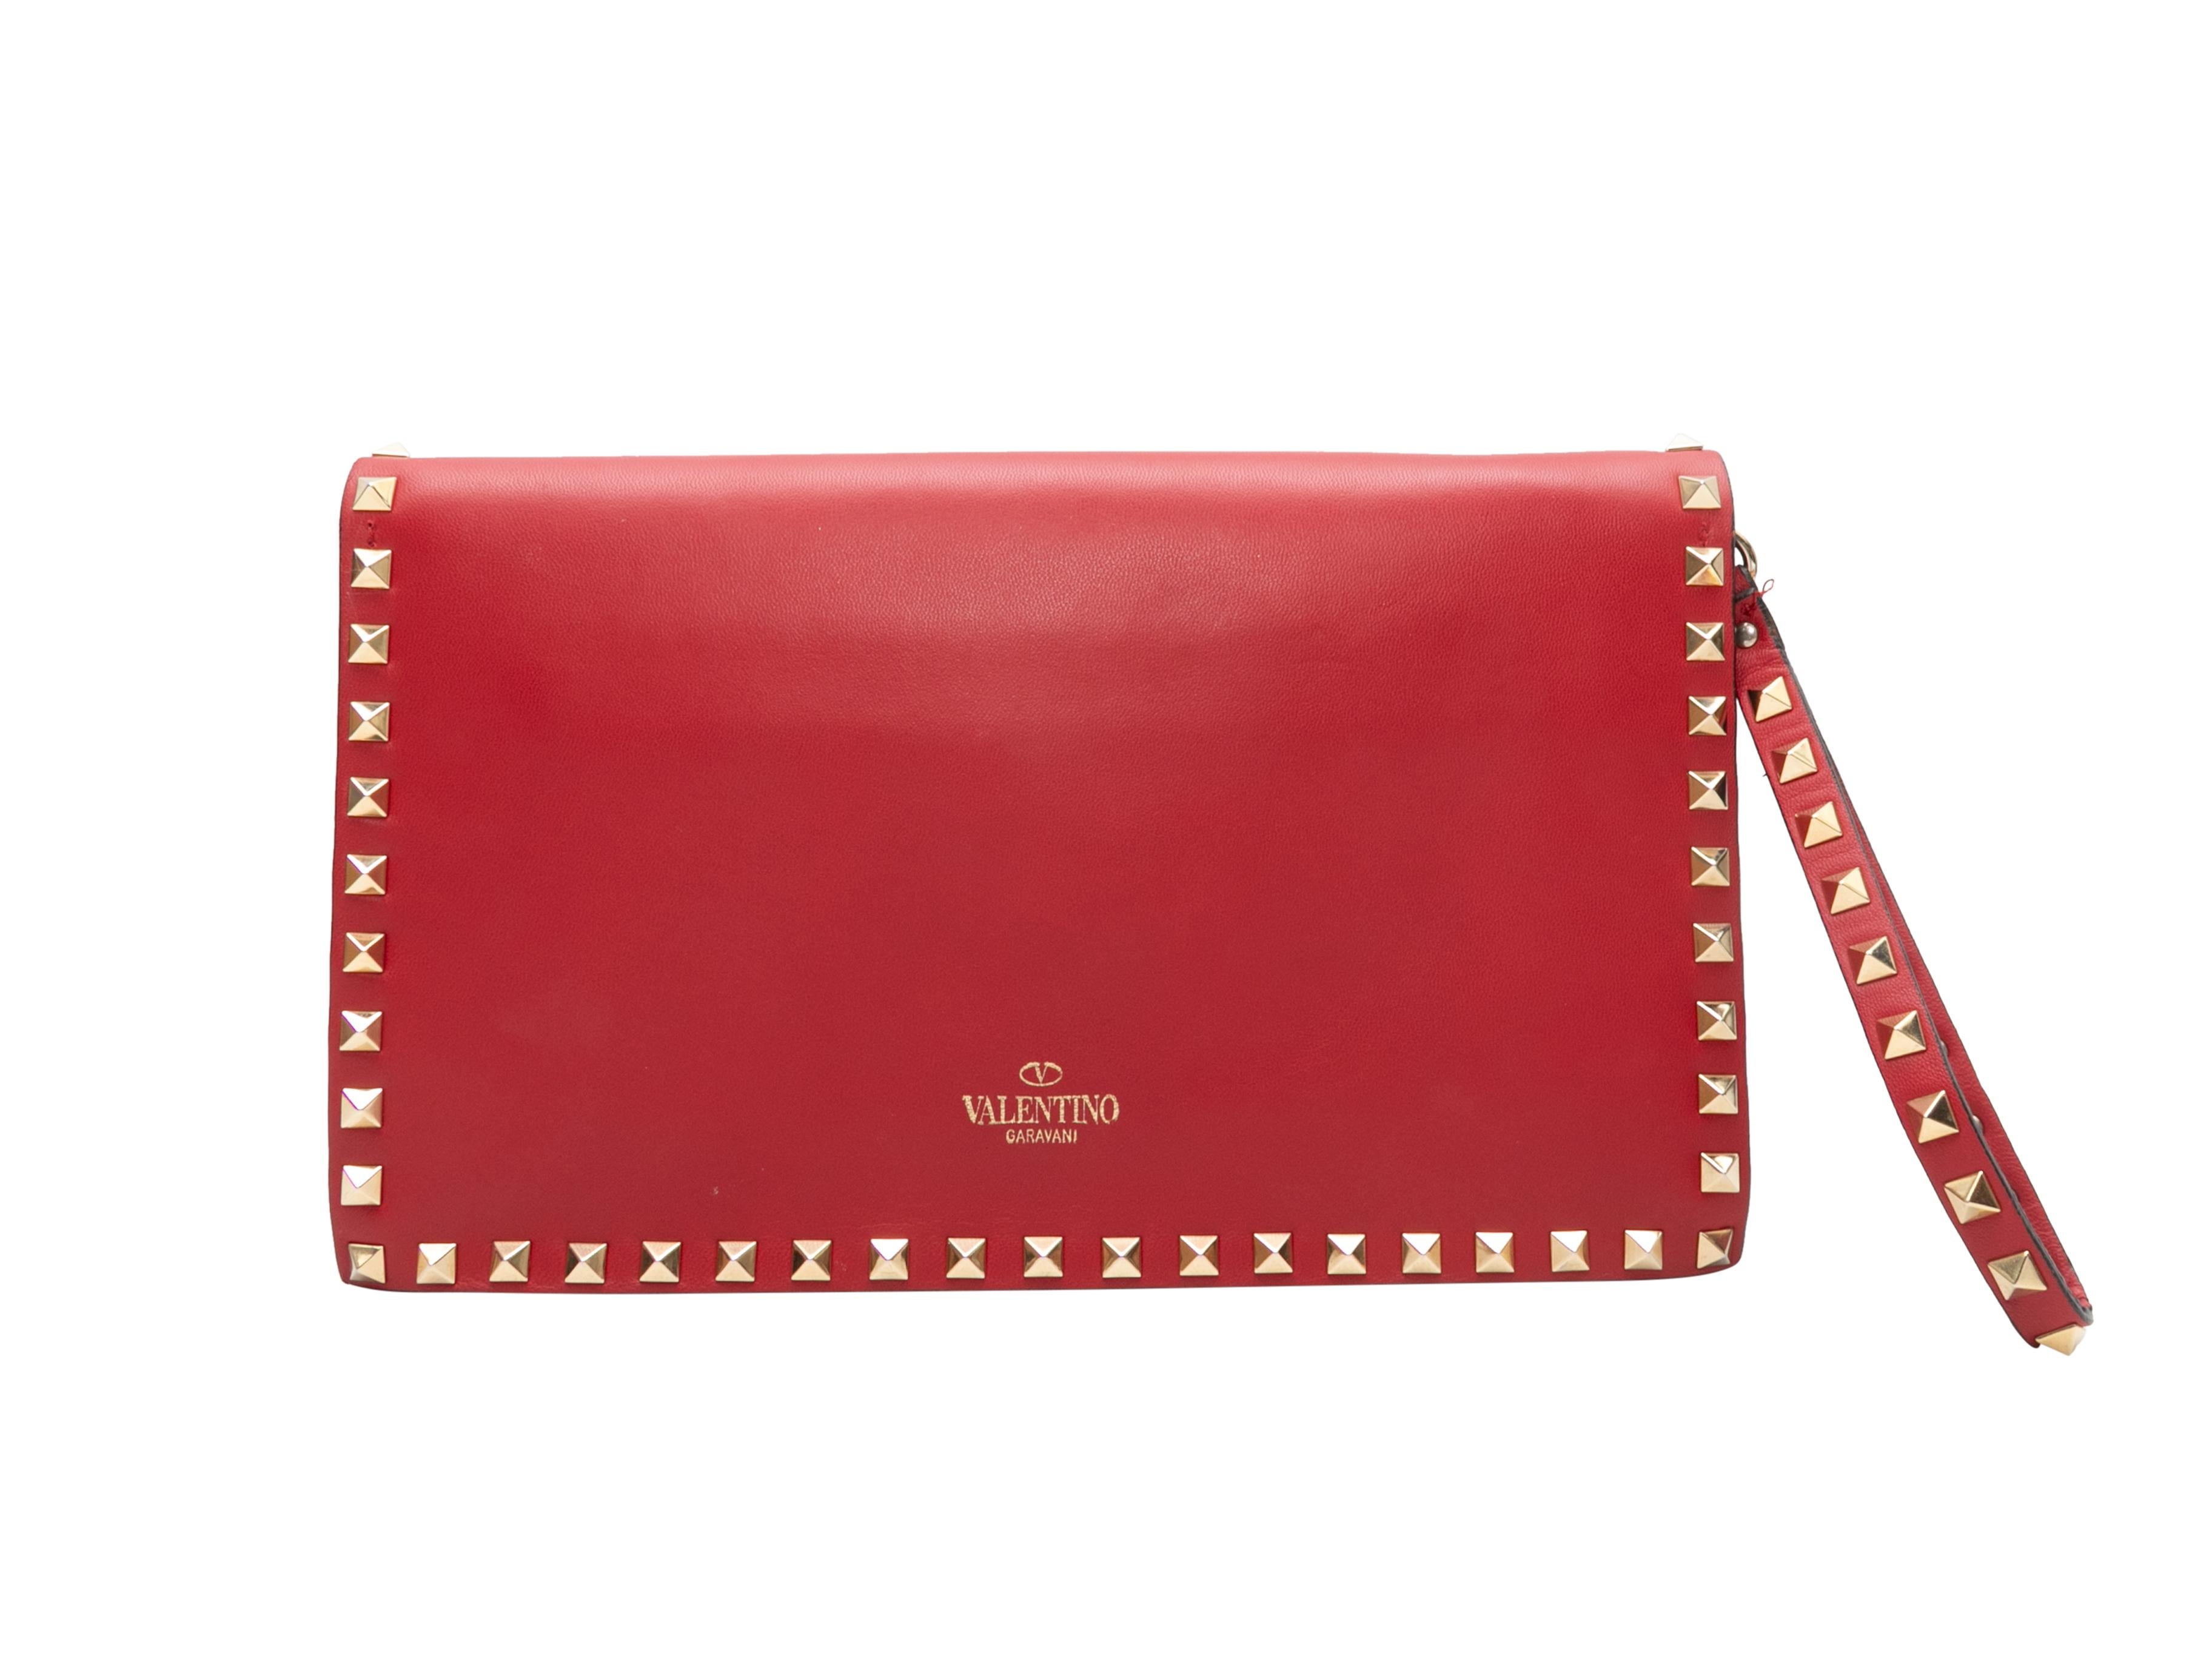 Red Valentino Rockstud Clutch For Sale 3